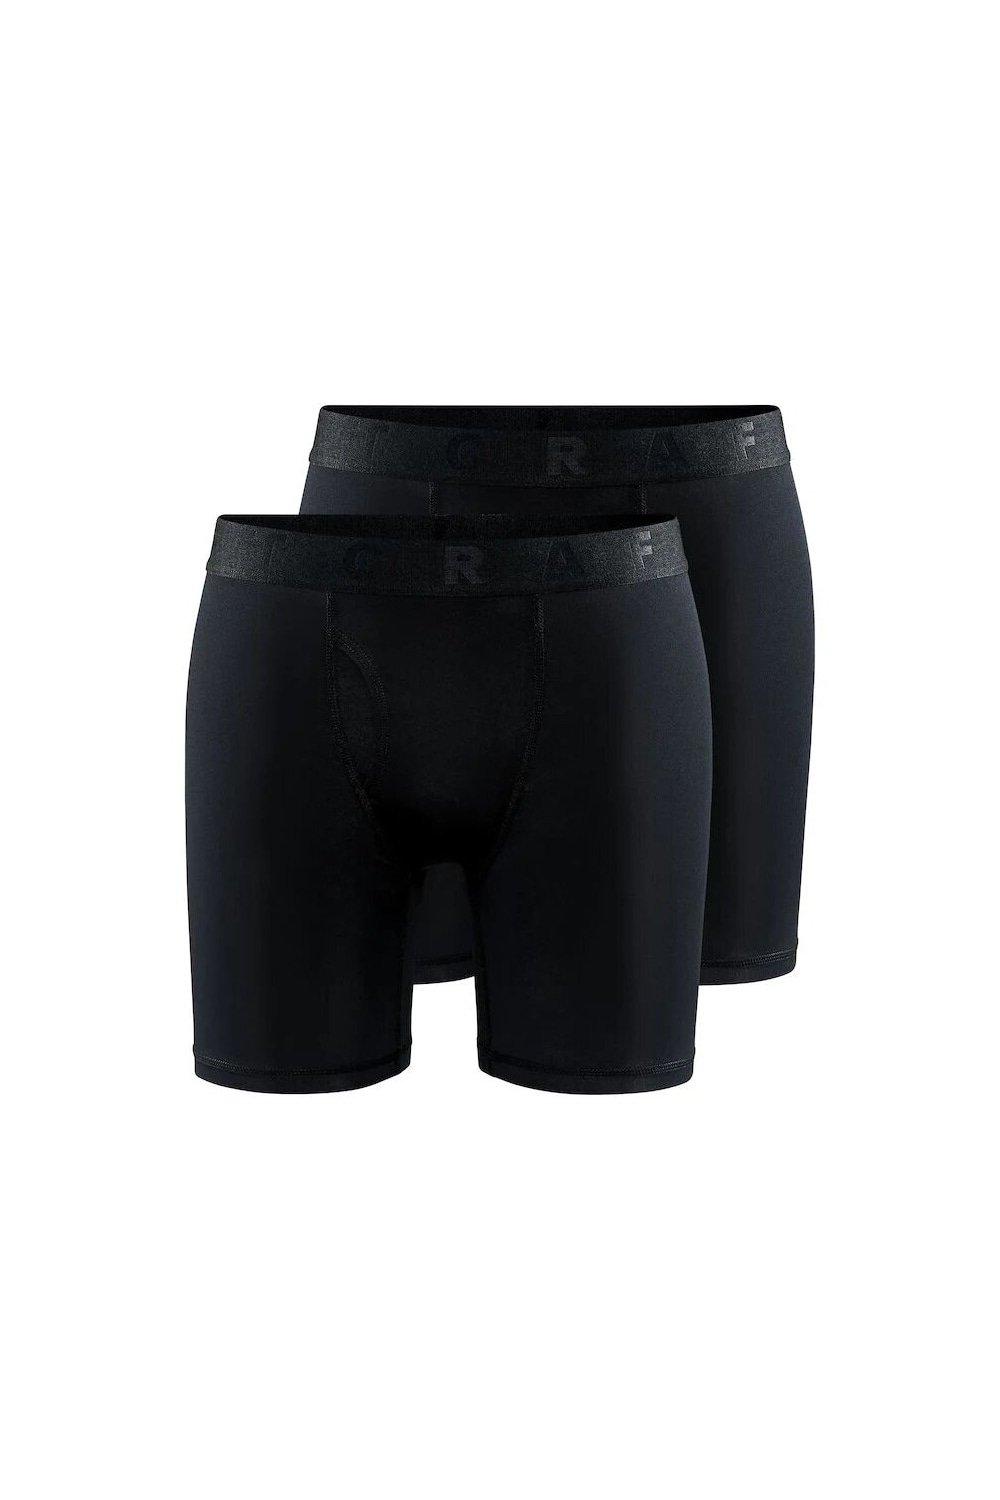 Core Dry Boxer Shorts (Pack of 2)